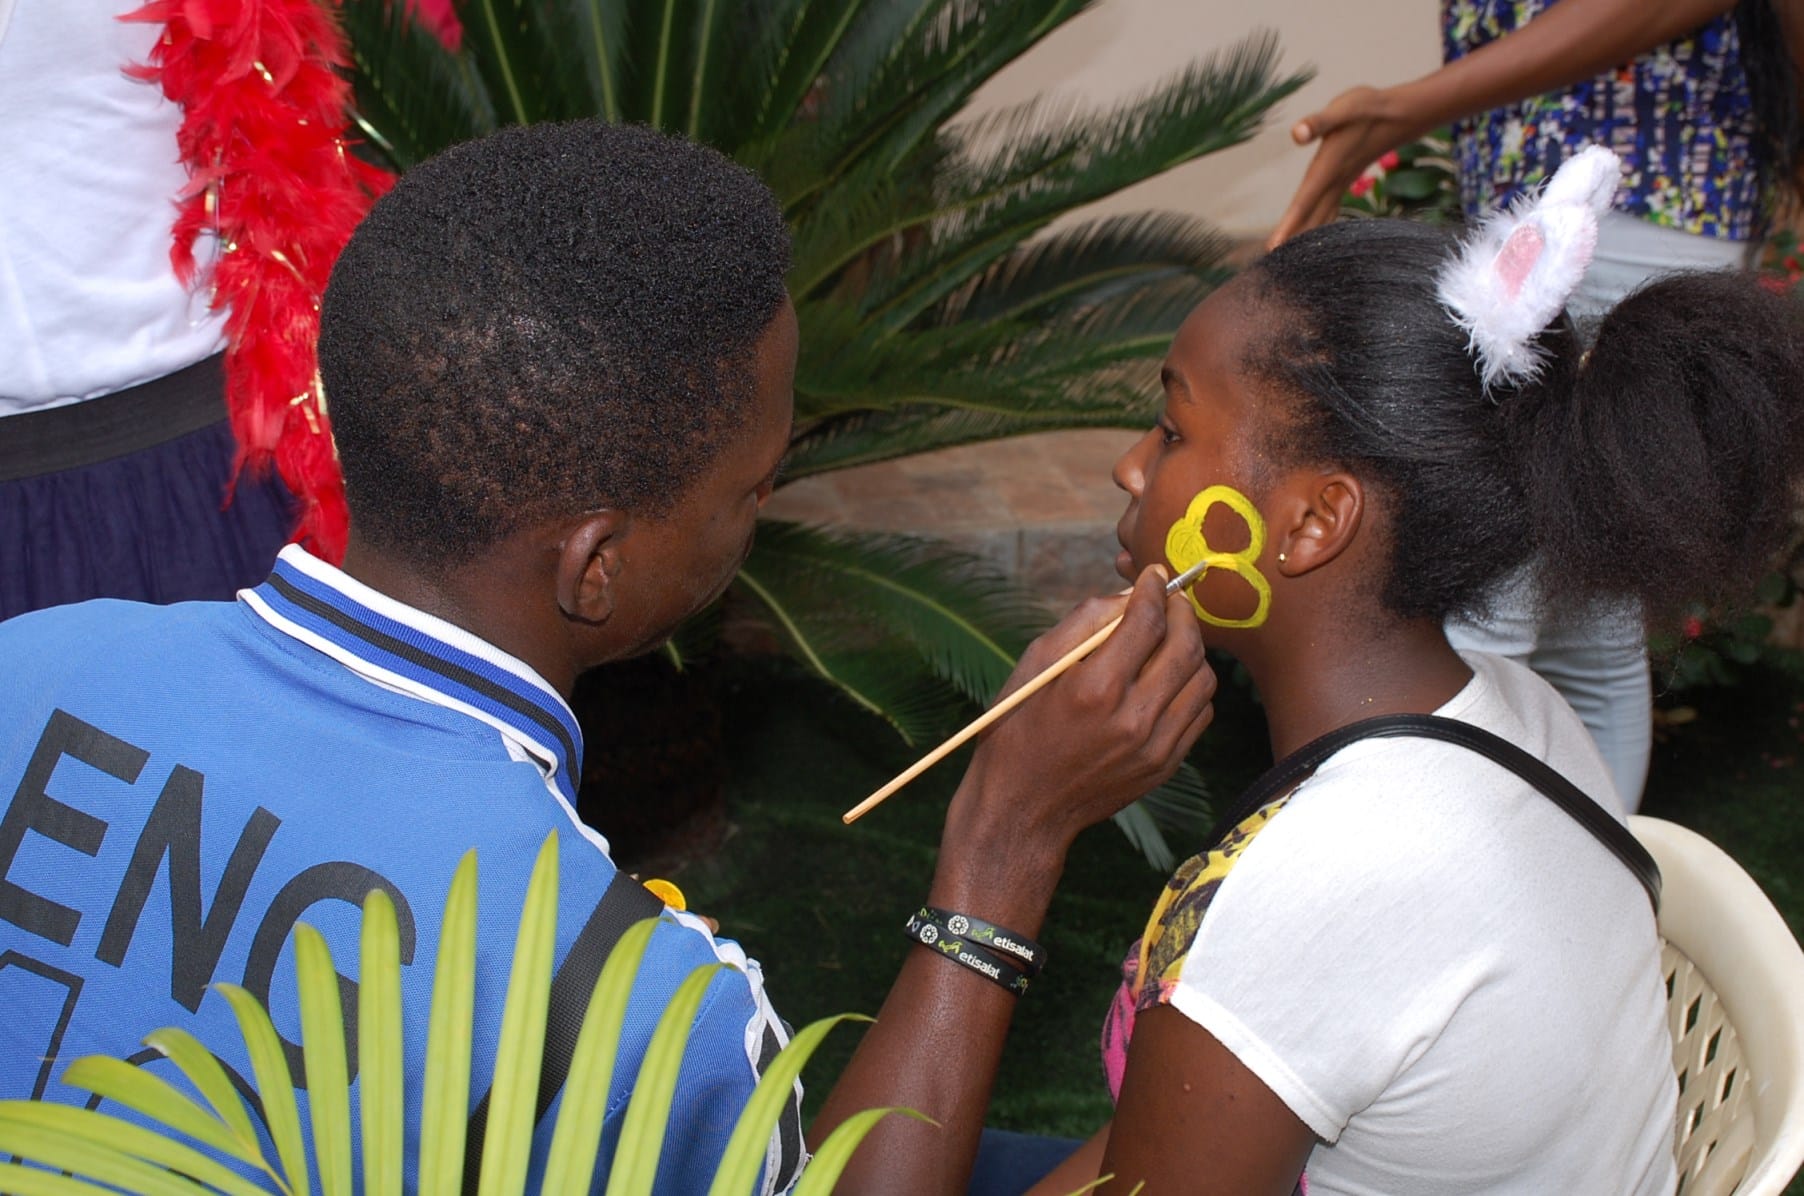 Face painting and art by participants